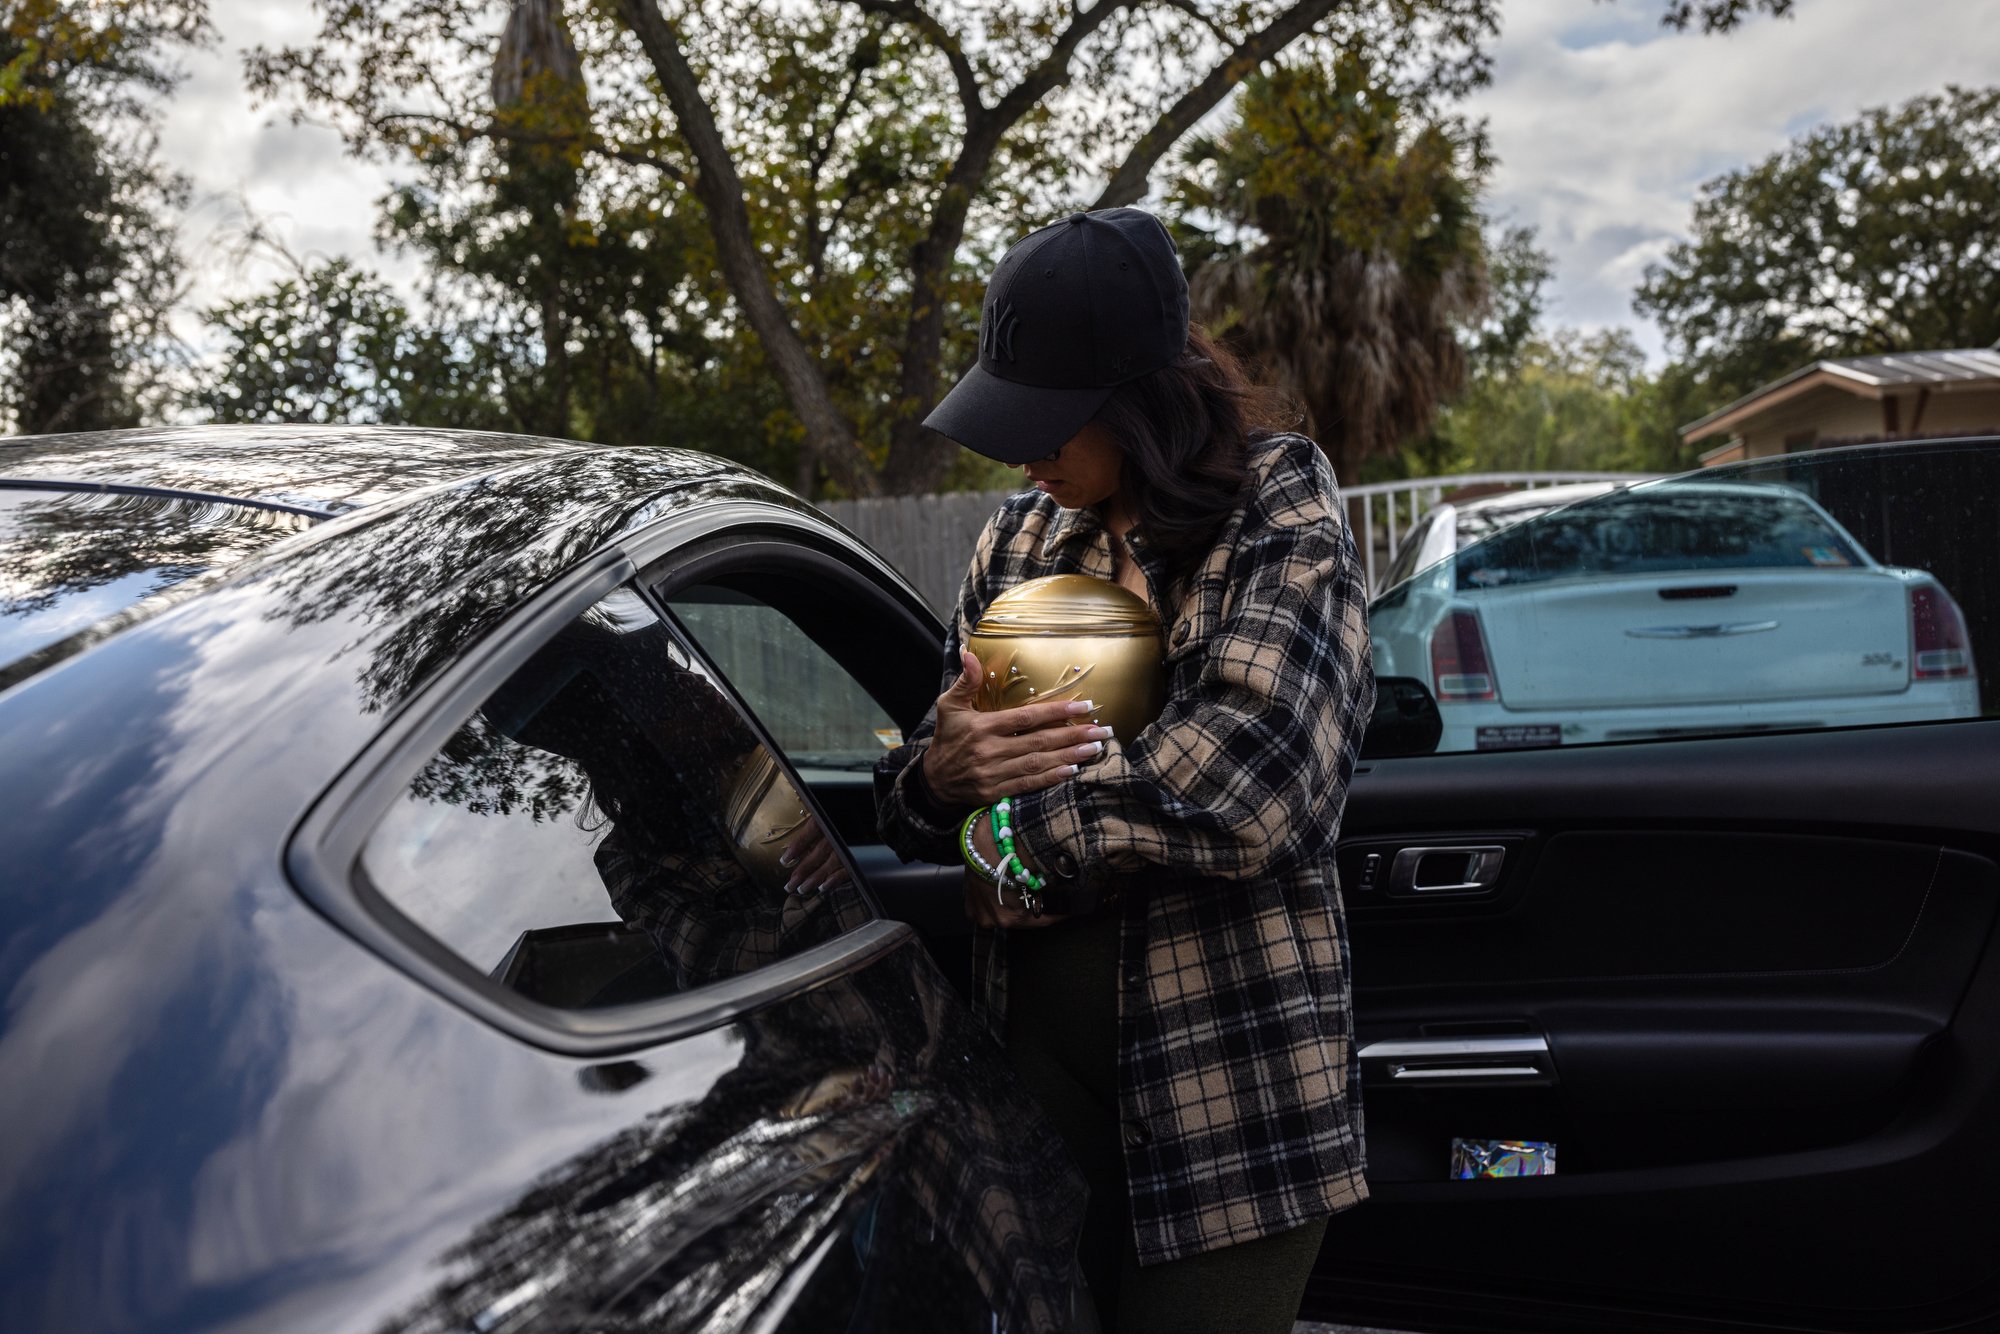  Ana Rodriguez carries the urn containing the ashes of her daughter, Maite, 10, who was killed in the mass shooting at Robb Elementary School, on her way to Hillcrest Memorial Cemetery in Uvalde, Texas, to celebrate Maite’s life and observe the Day o